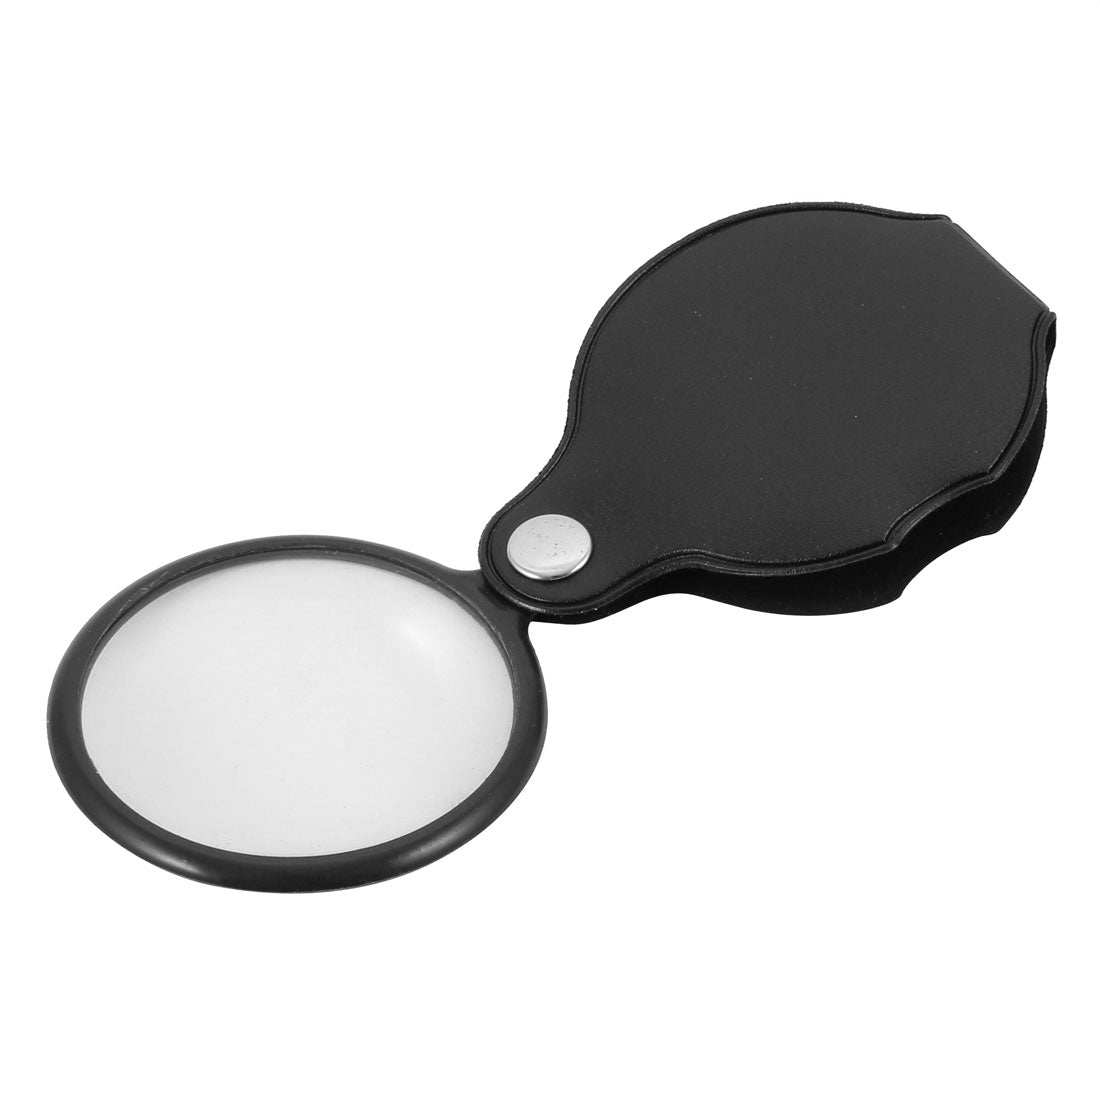 uxcell Uxcell Pocket F6X Magnifying Magnifier Glass Lens W Rotating Protective